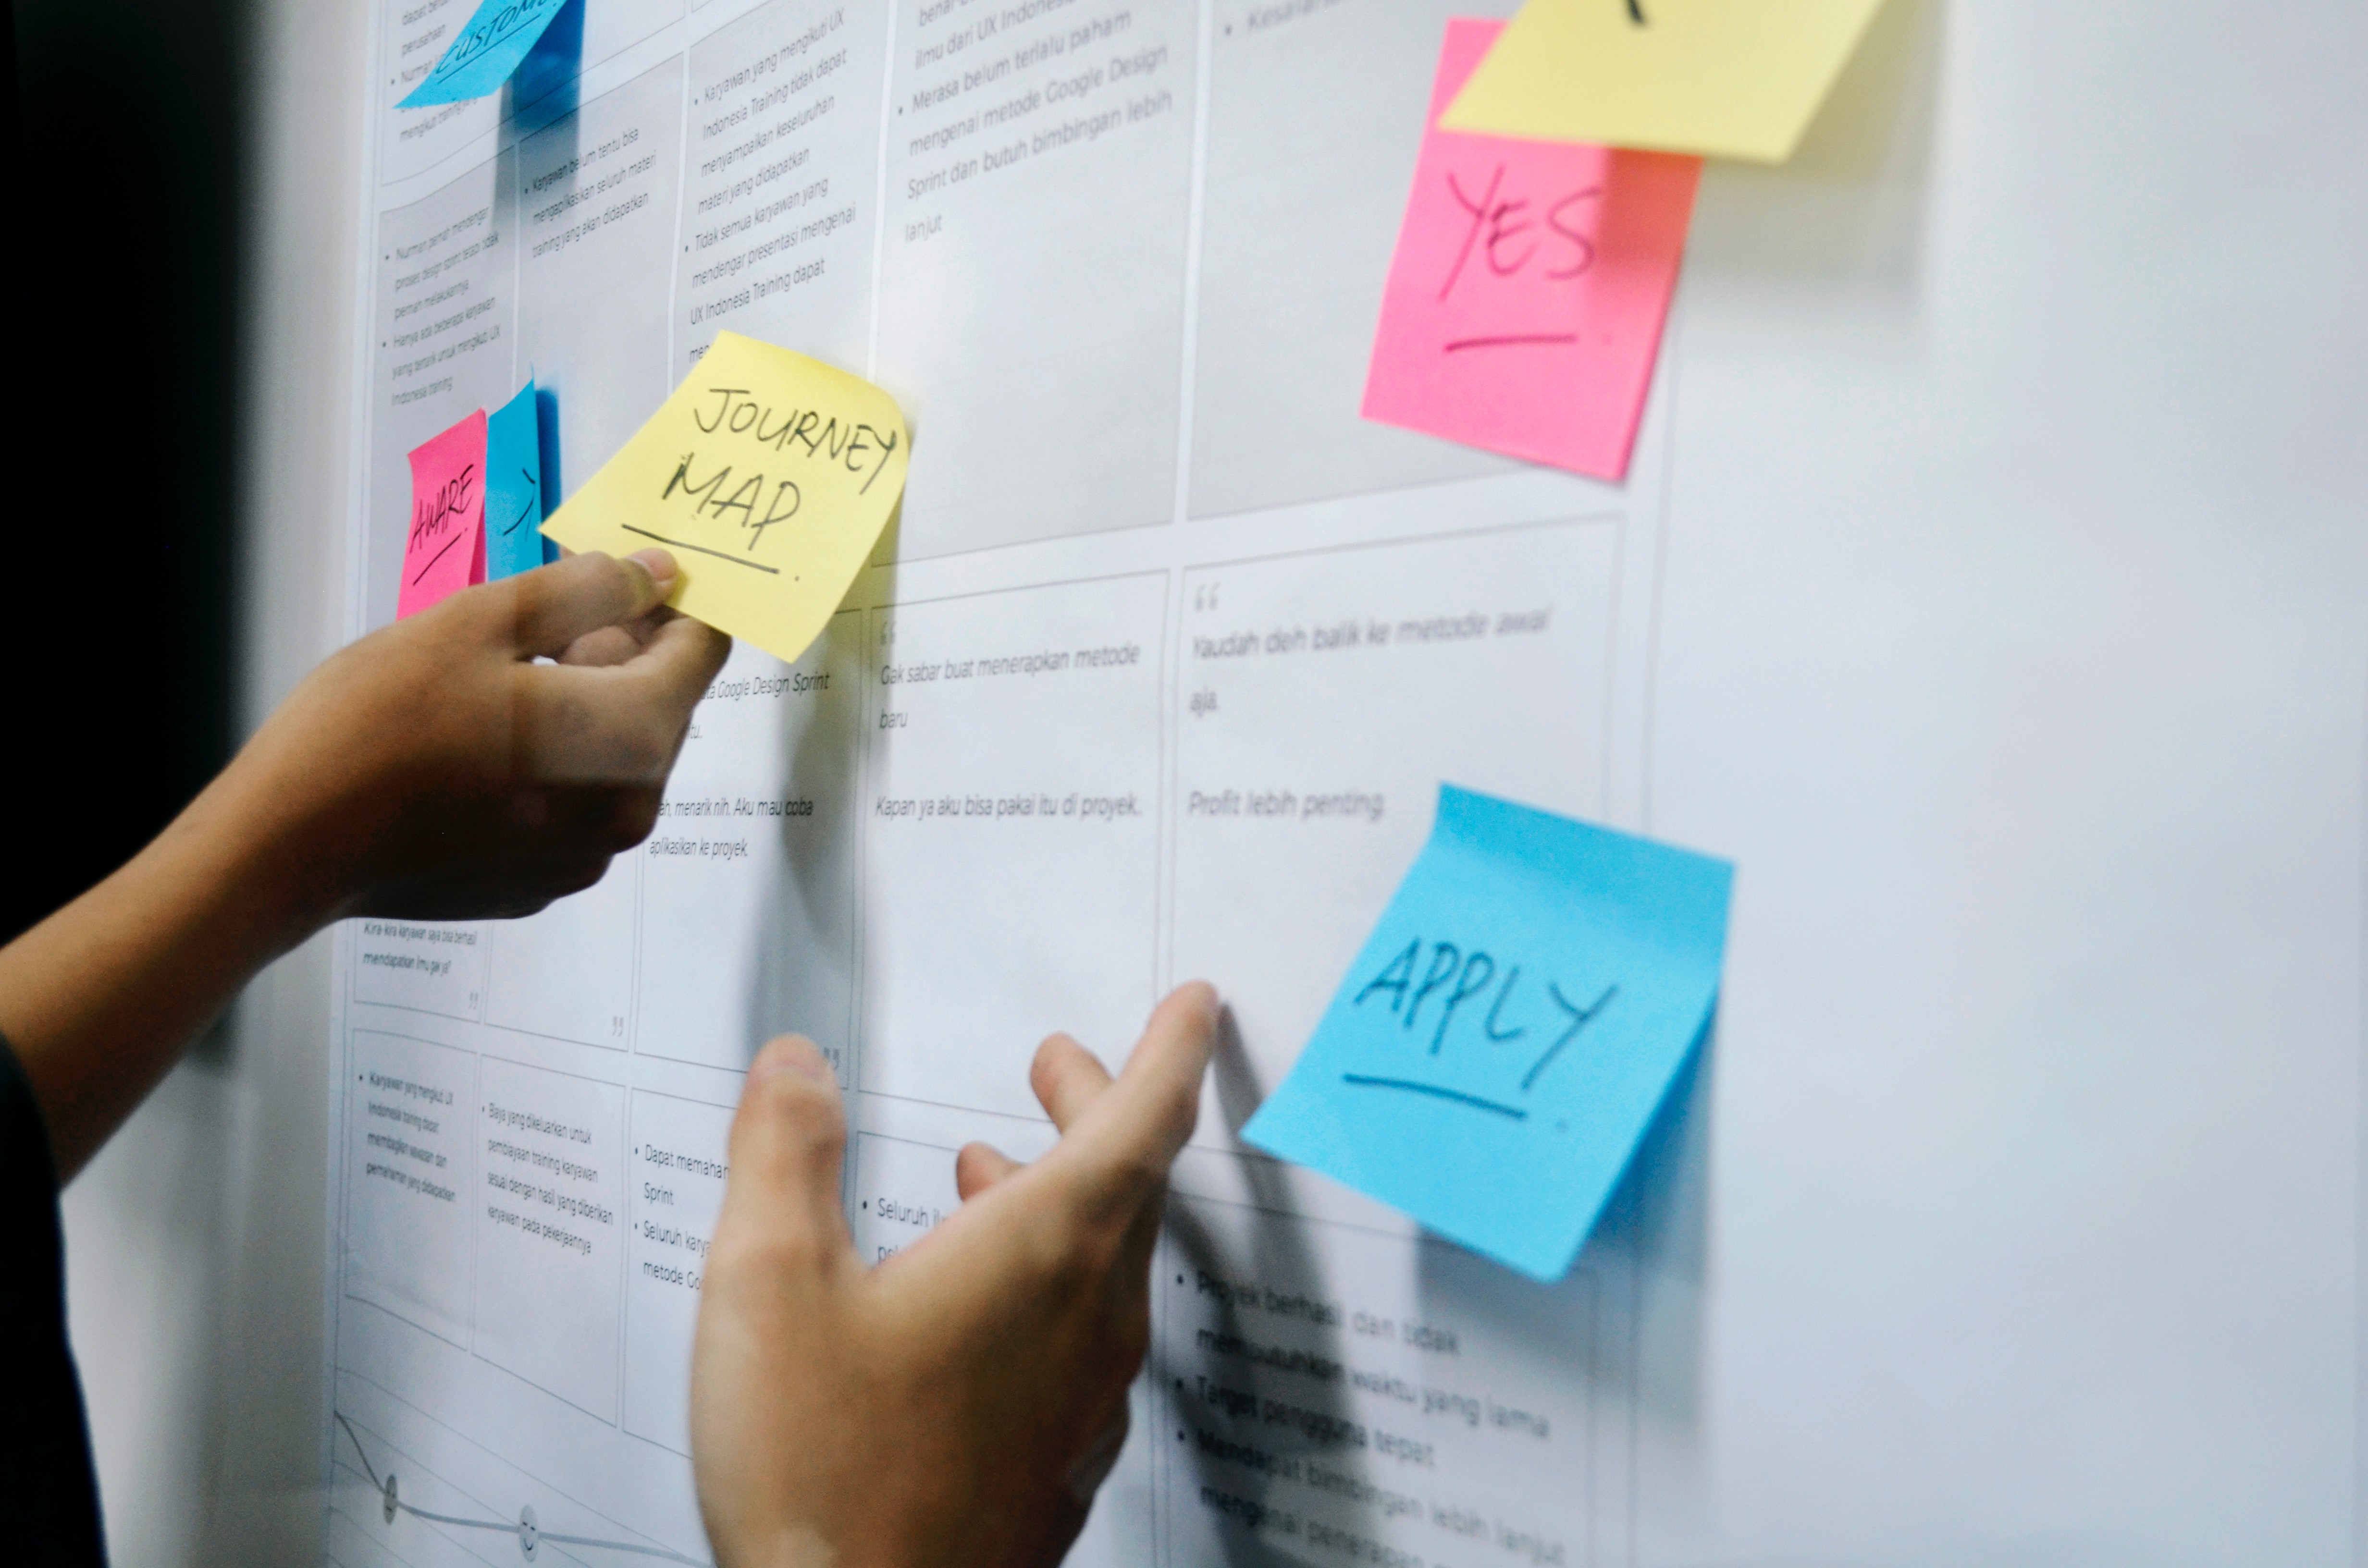 Post it notes saying "journey map" and "apply"